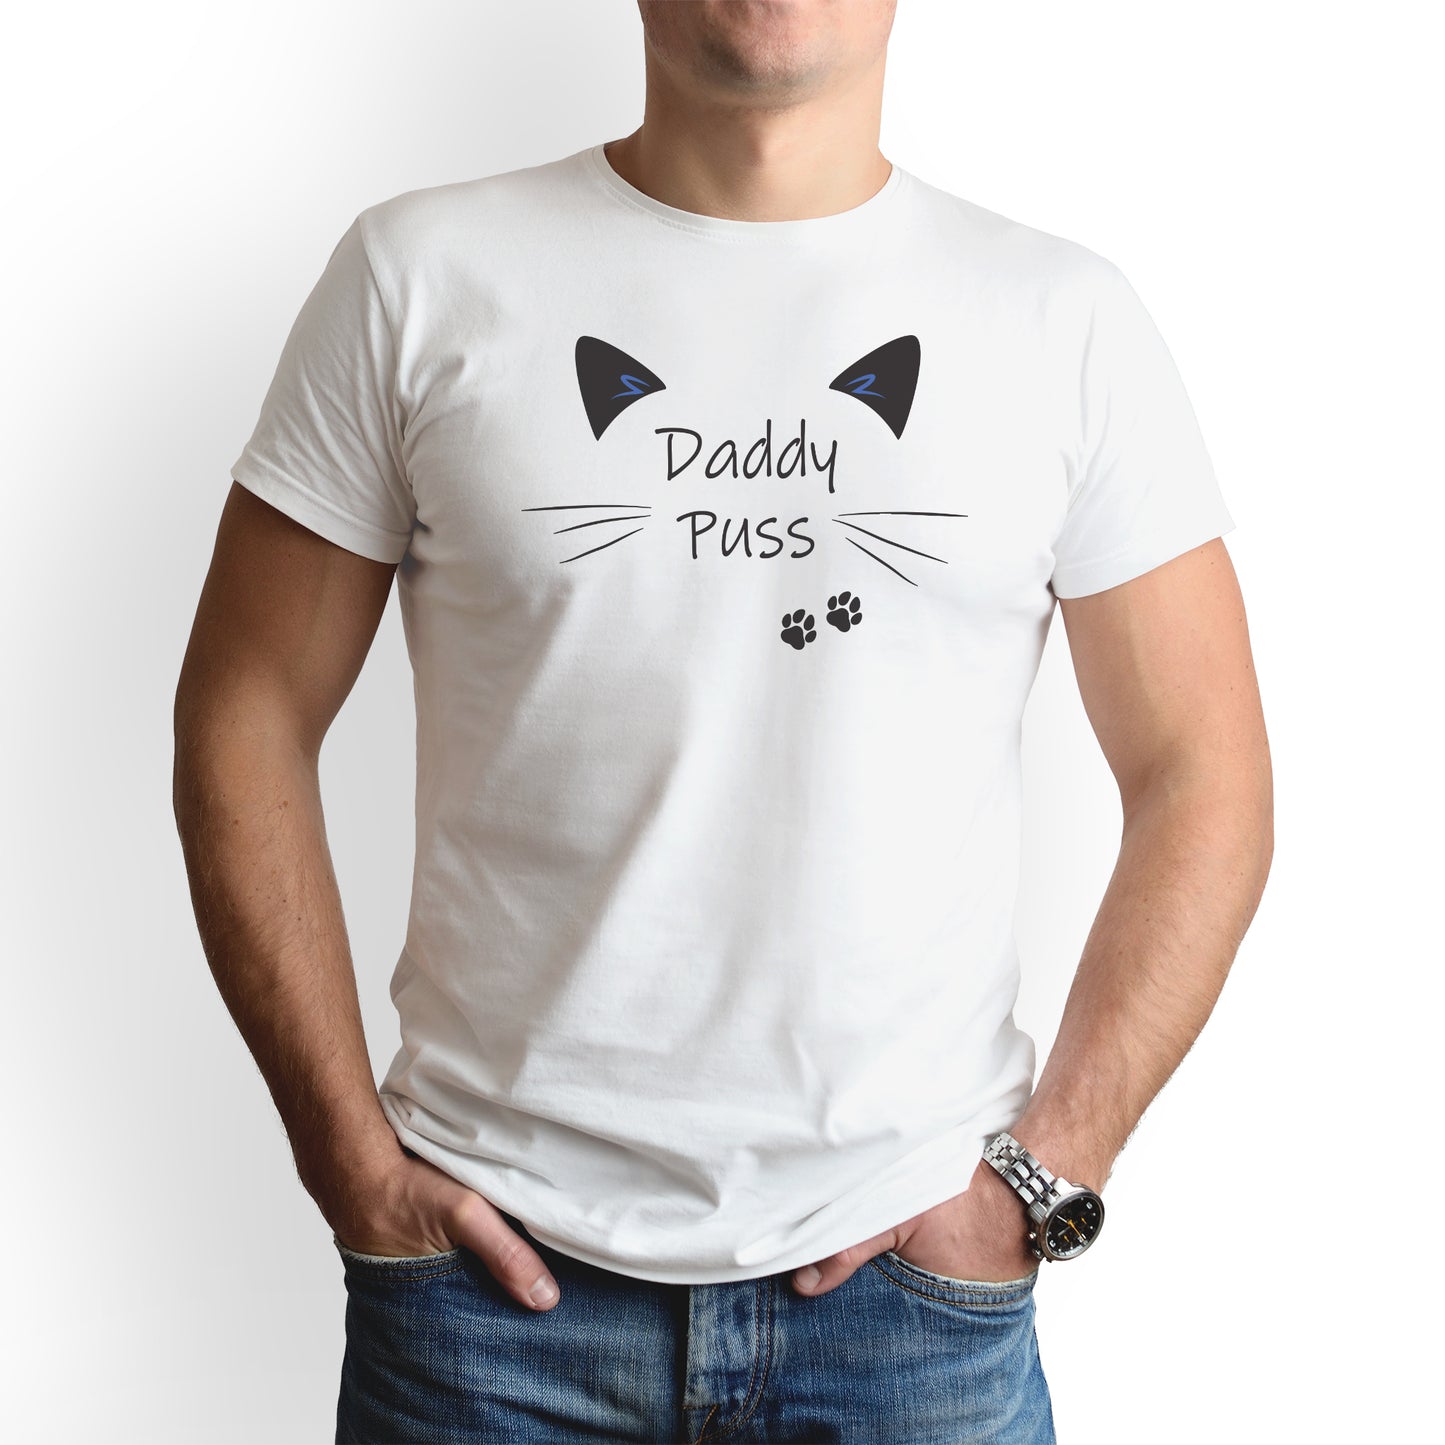 Daddy Puss T-Shirt, Cat Dad Tee, Cat Owner Shirt, Gift for Dad